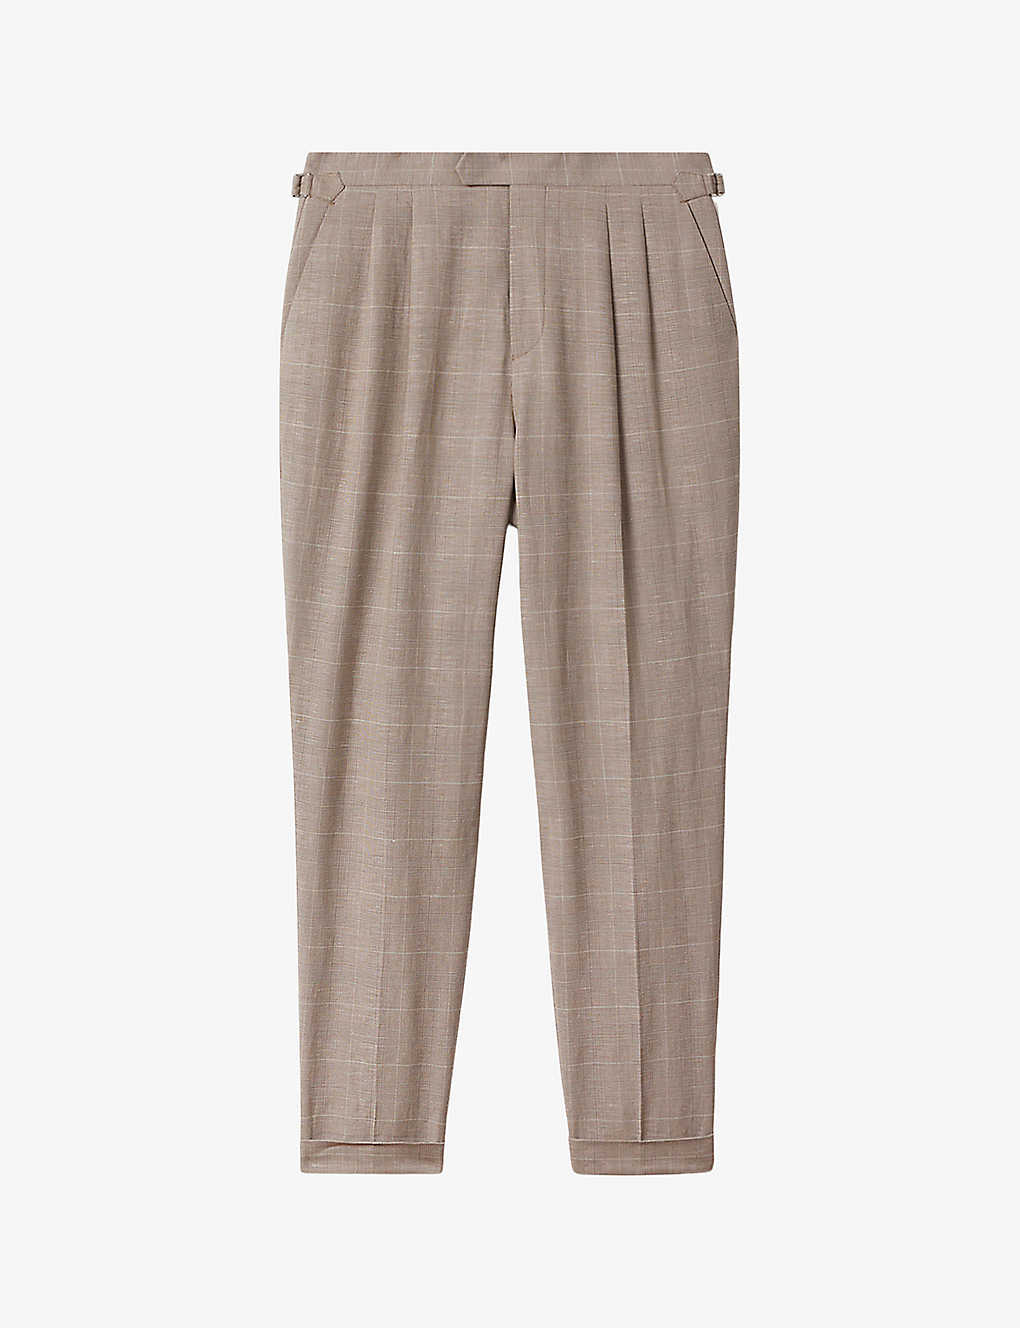 Reiss Mens Oatmeal Collected Pleated Slim-leg Woven Trousers